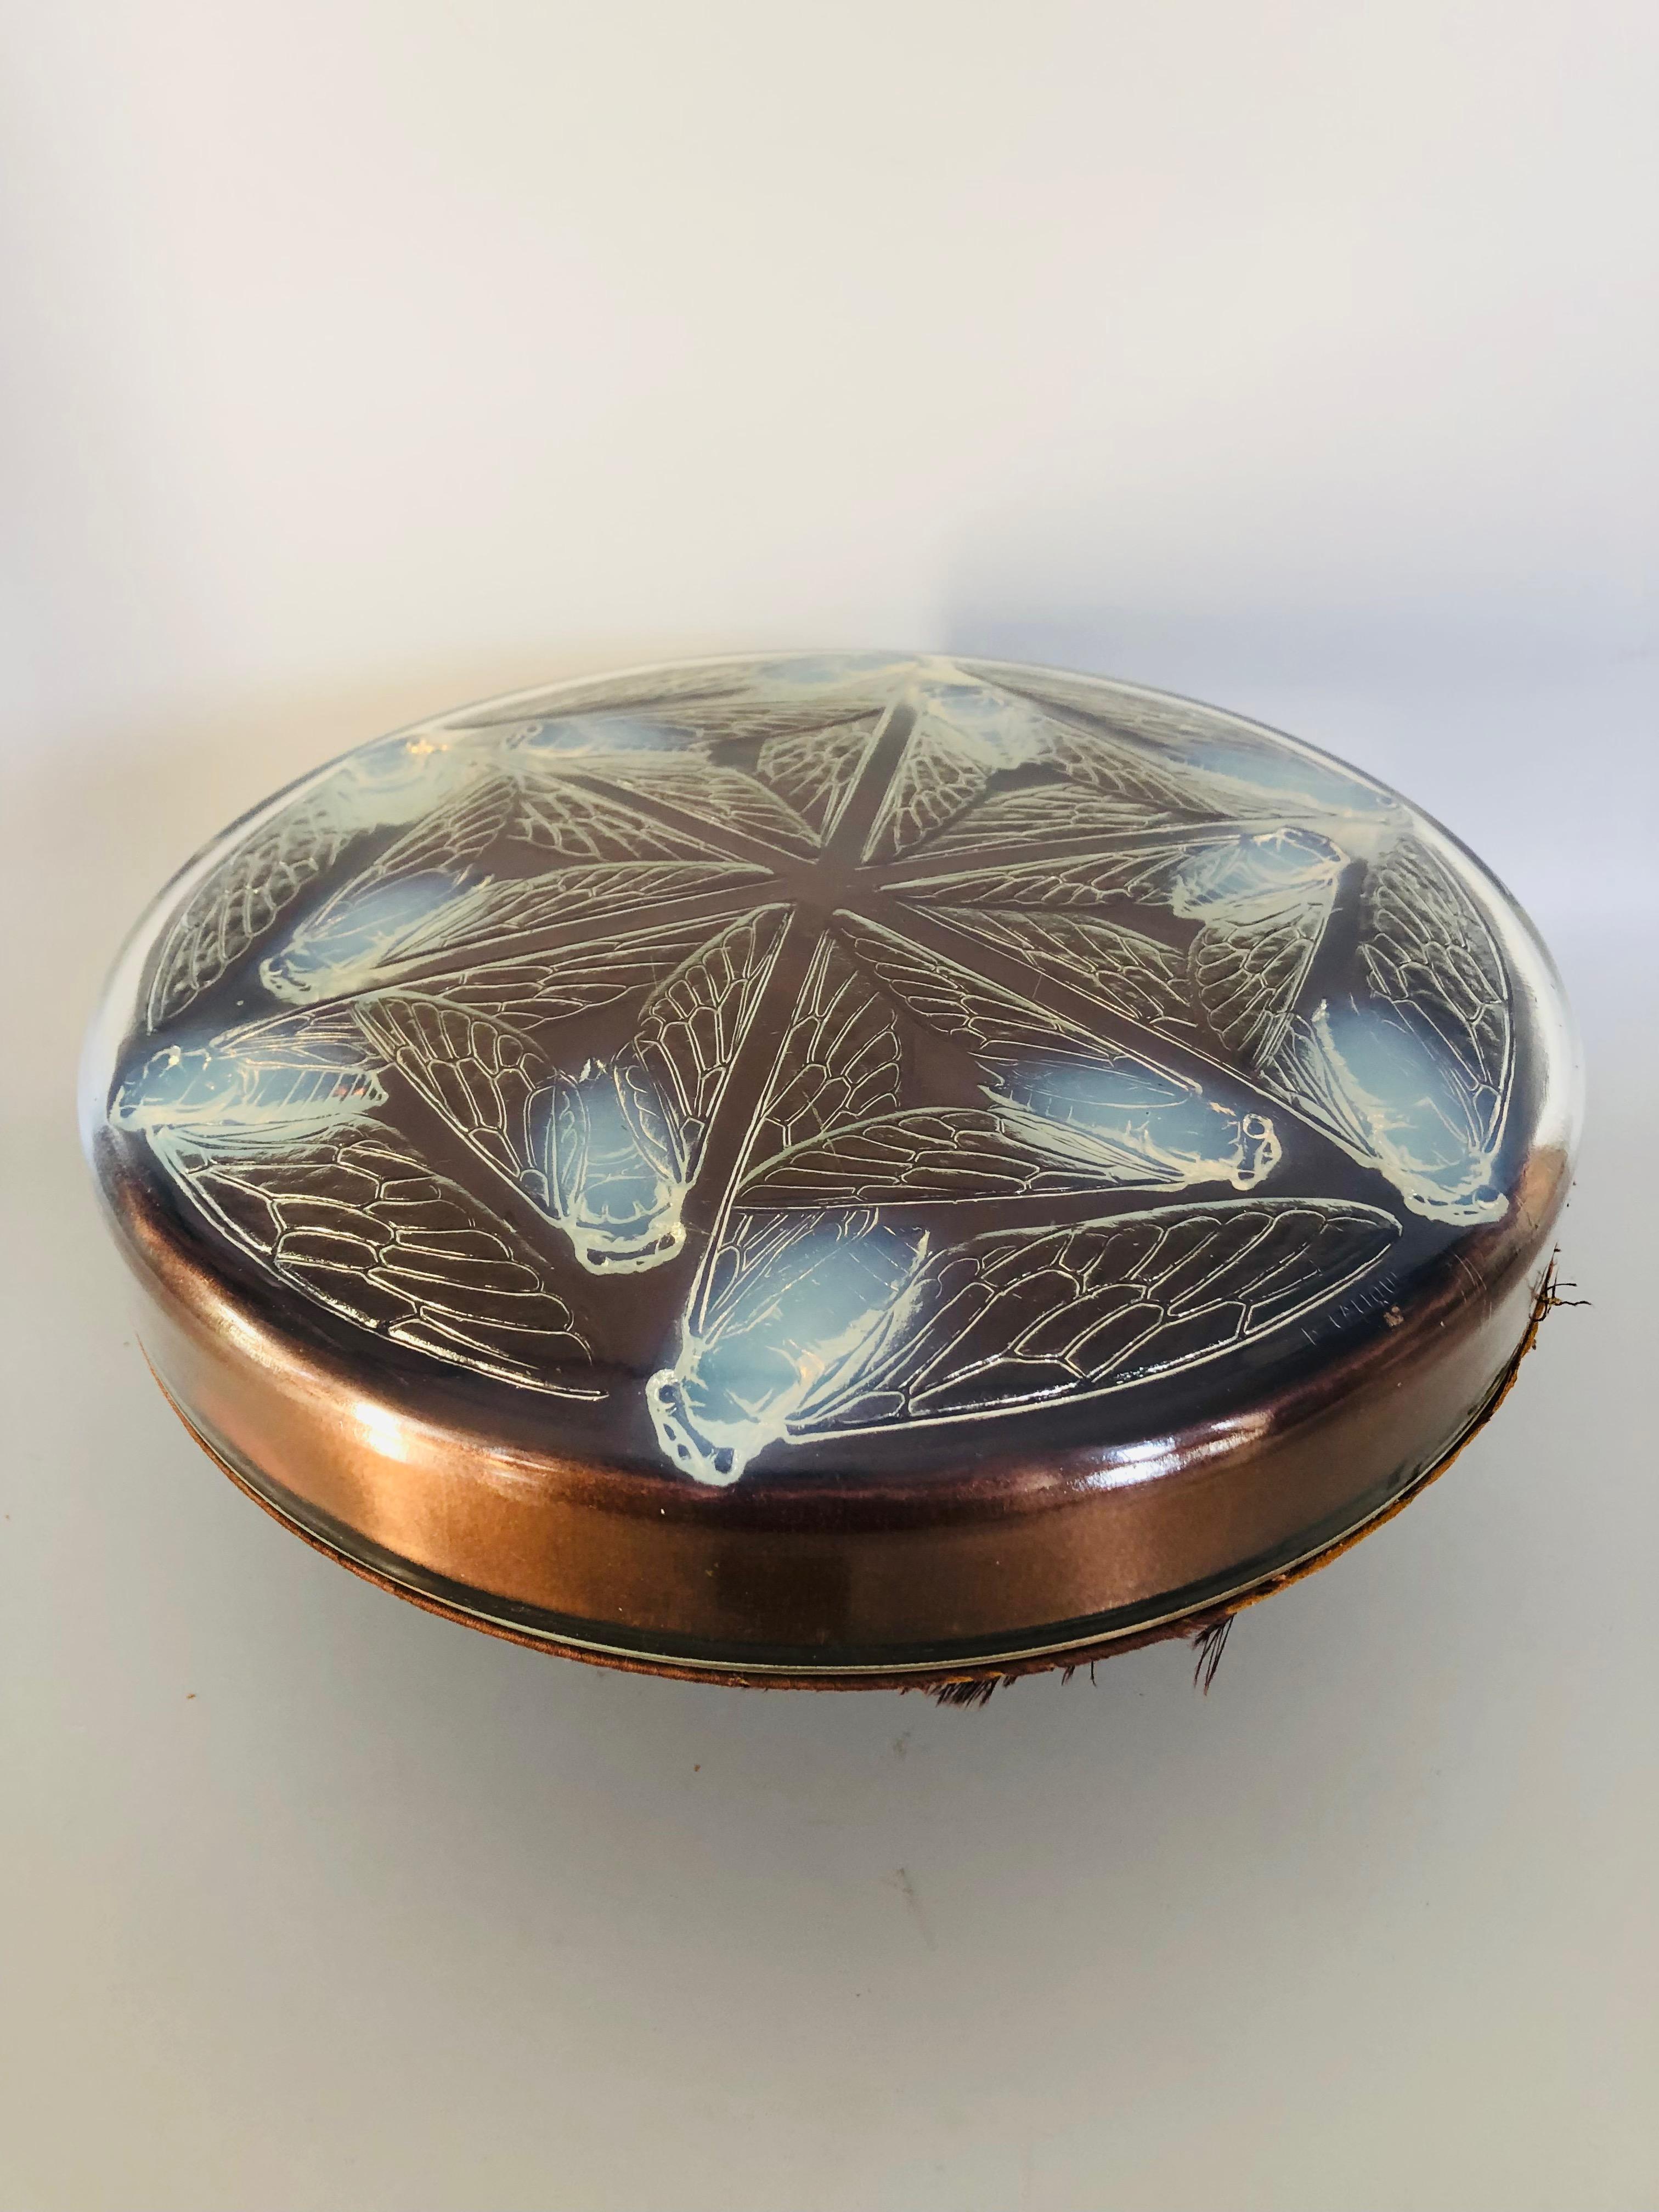 Opalescent molded glass box decorated with cicadas. 
This model was created in 1921. 
The glassware is in perfect condition.
The satin background is original and requires restoration.
Molded R Lalique signature.

Height: 6cm
Diameter: 25.5cm
Weight: